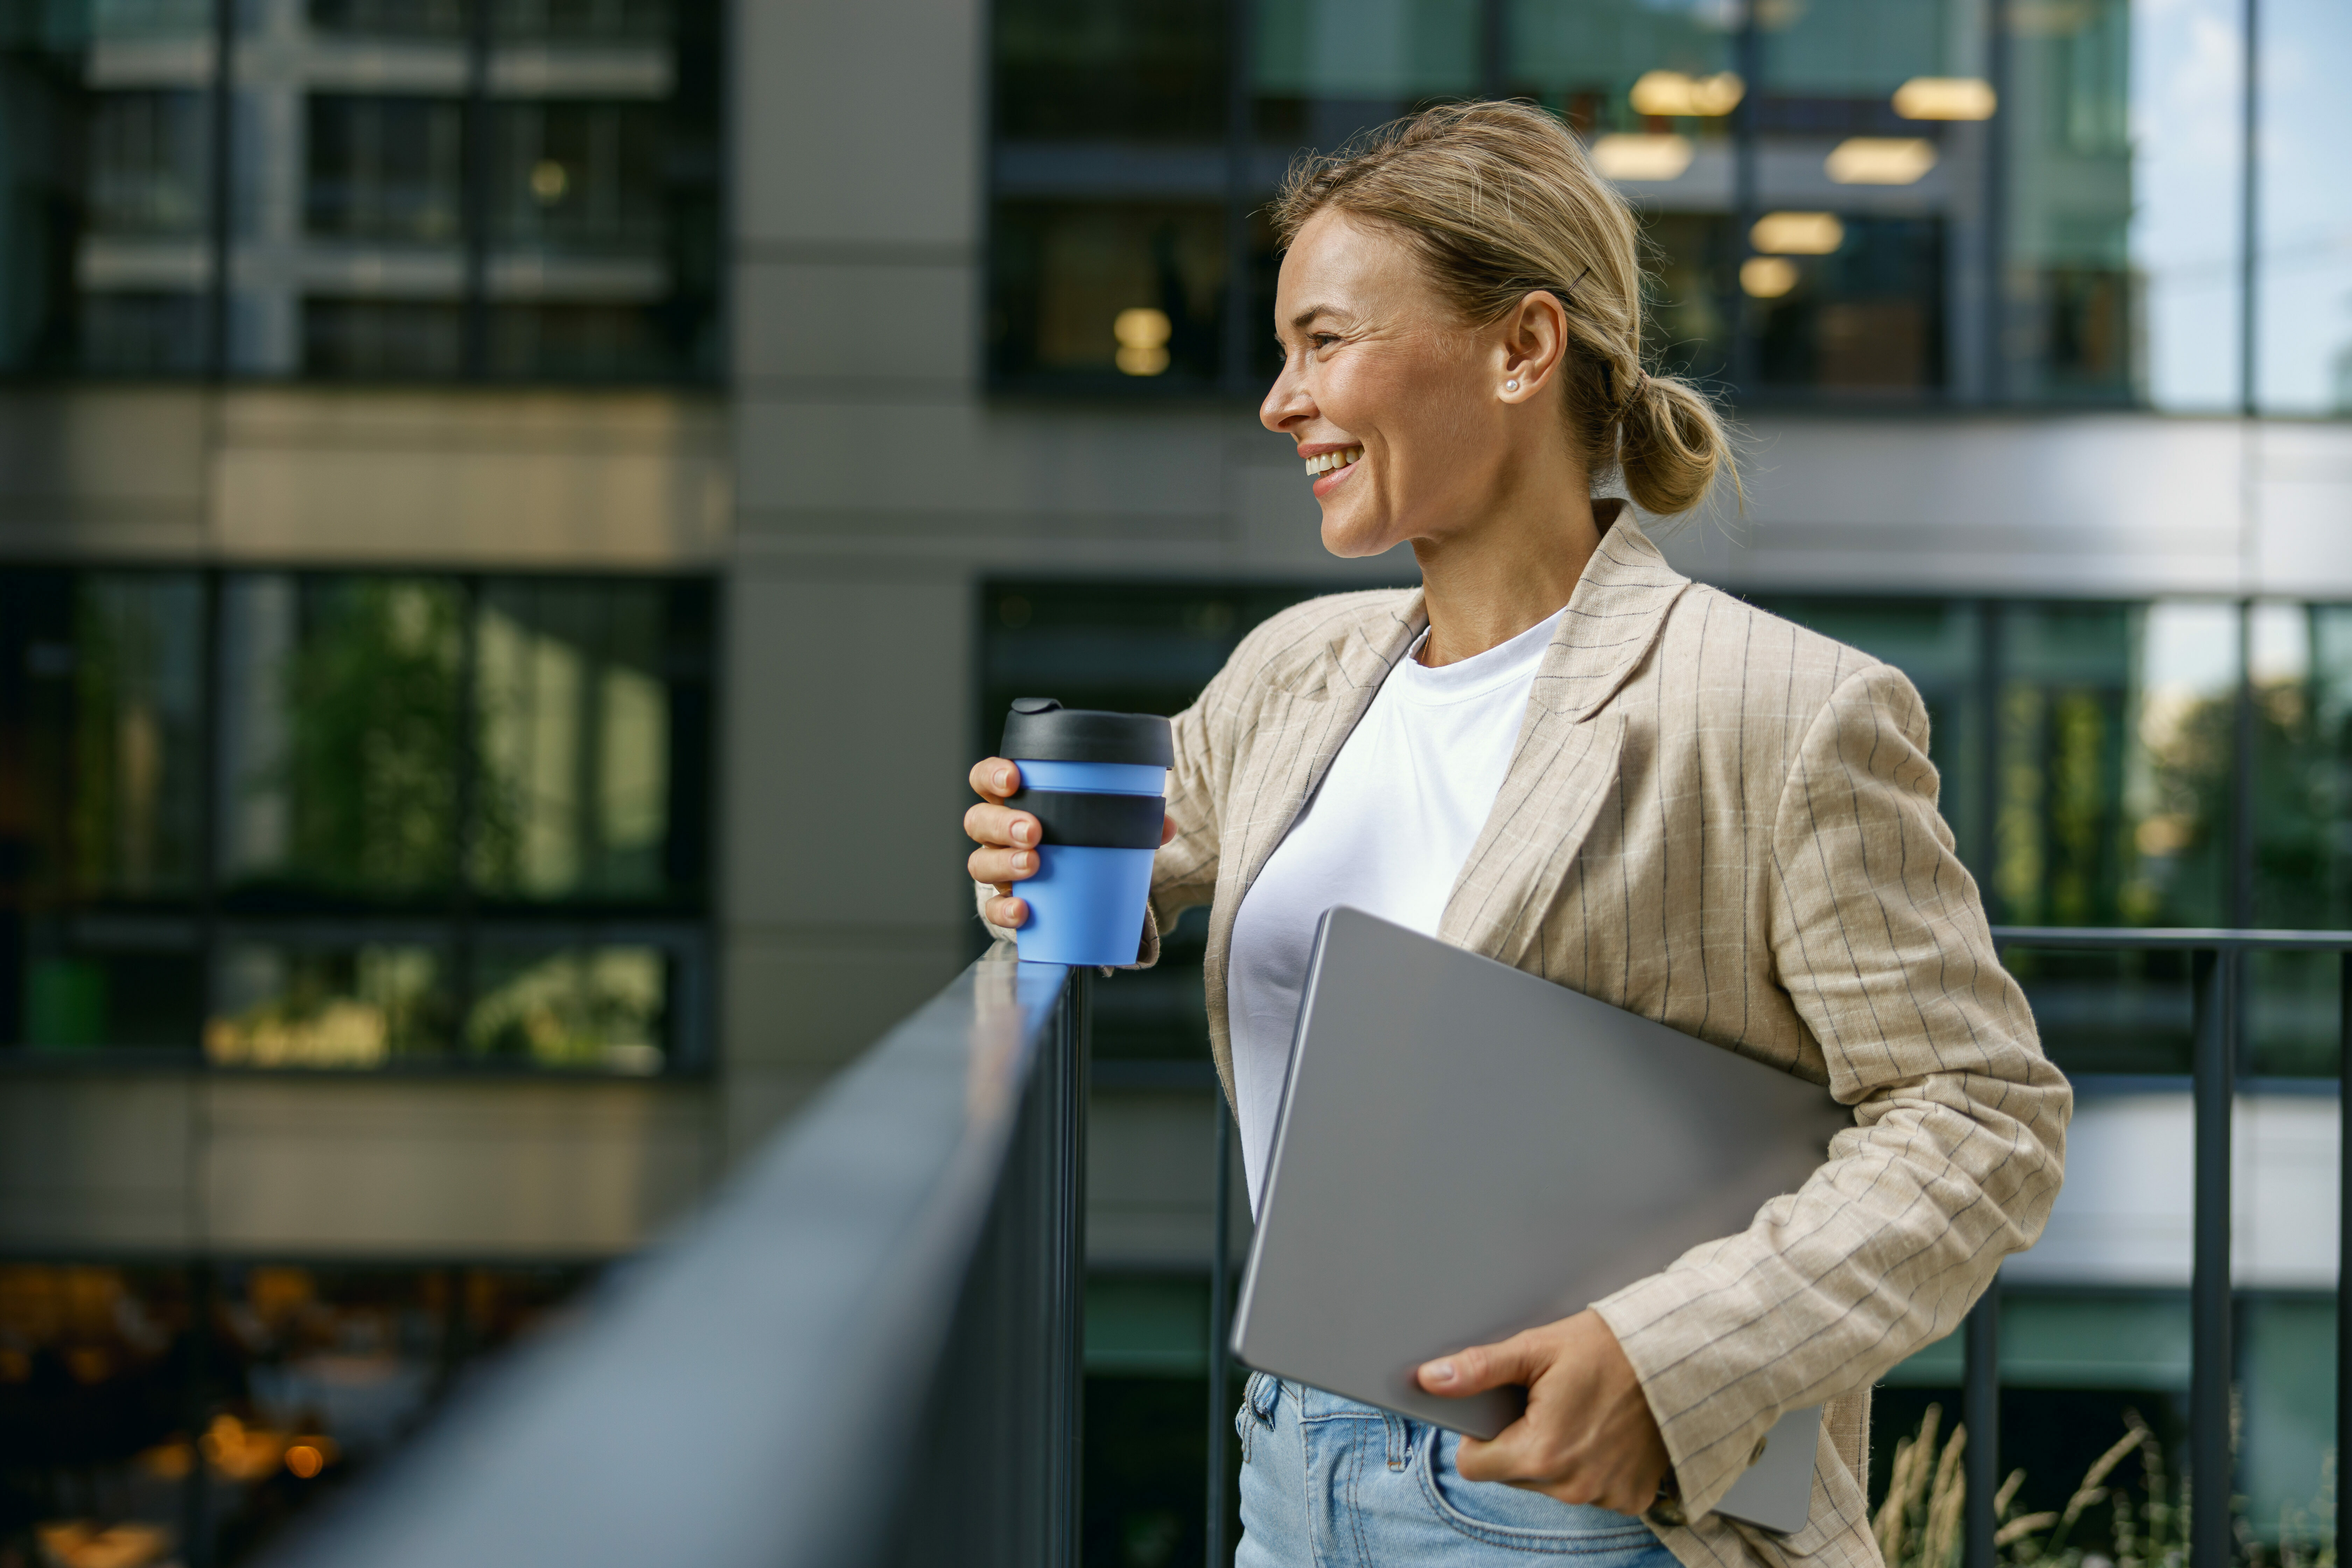 Woman freelancer standing with laptop and coffee cup on modern building background during break time